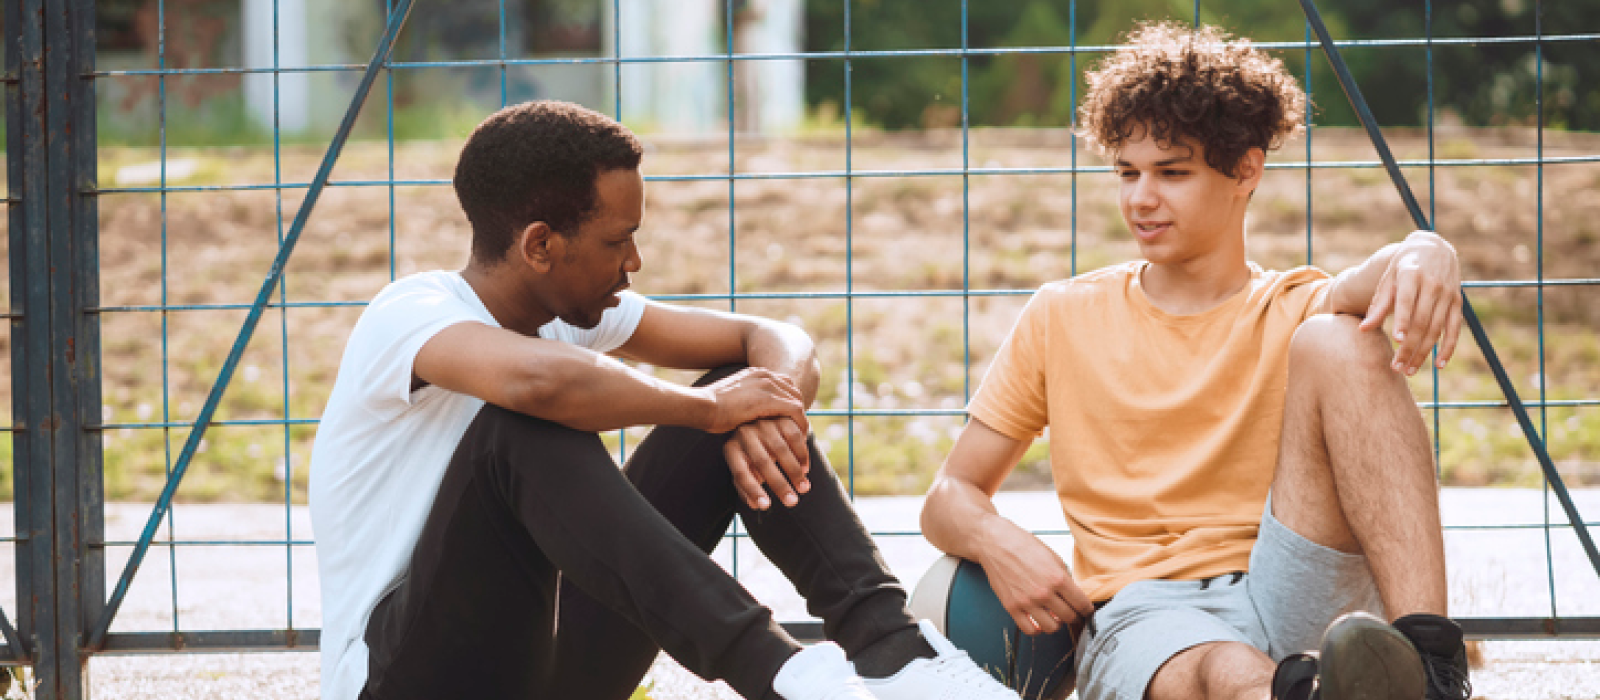 Two young men sitting on the ground at the basketball court. One of them is coping with a depressive episode and is using their support system to help them.